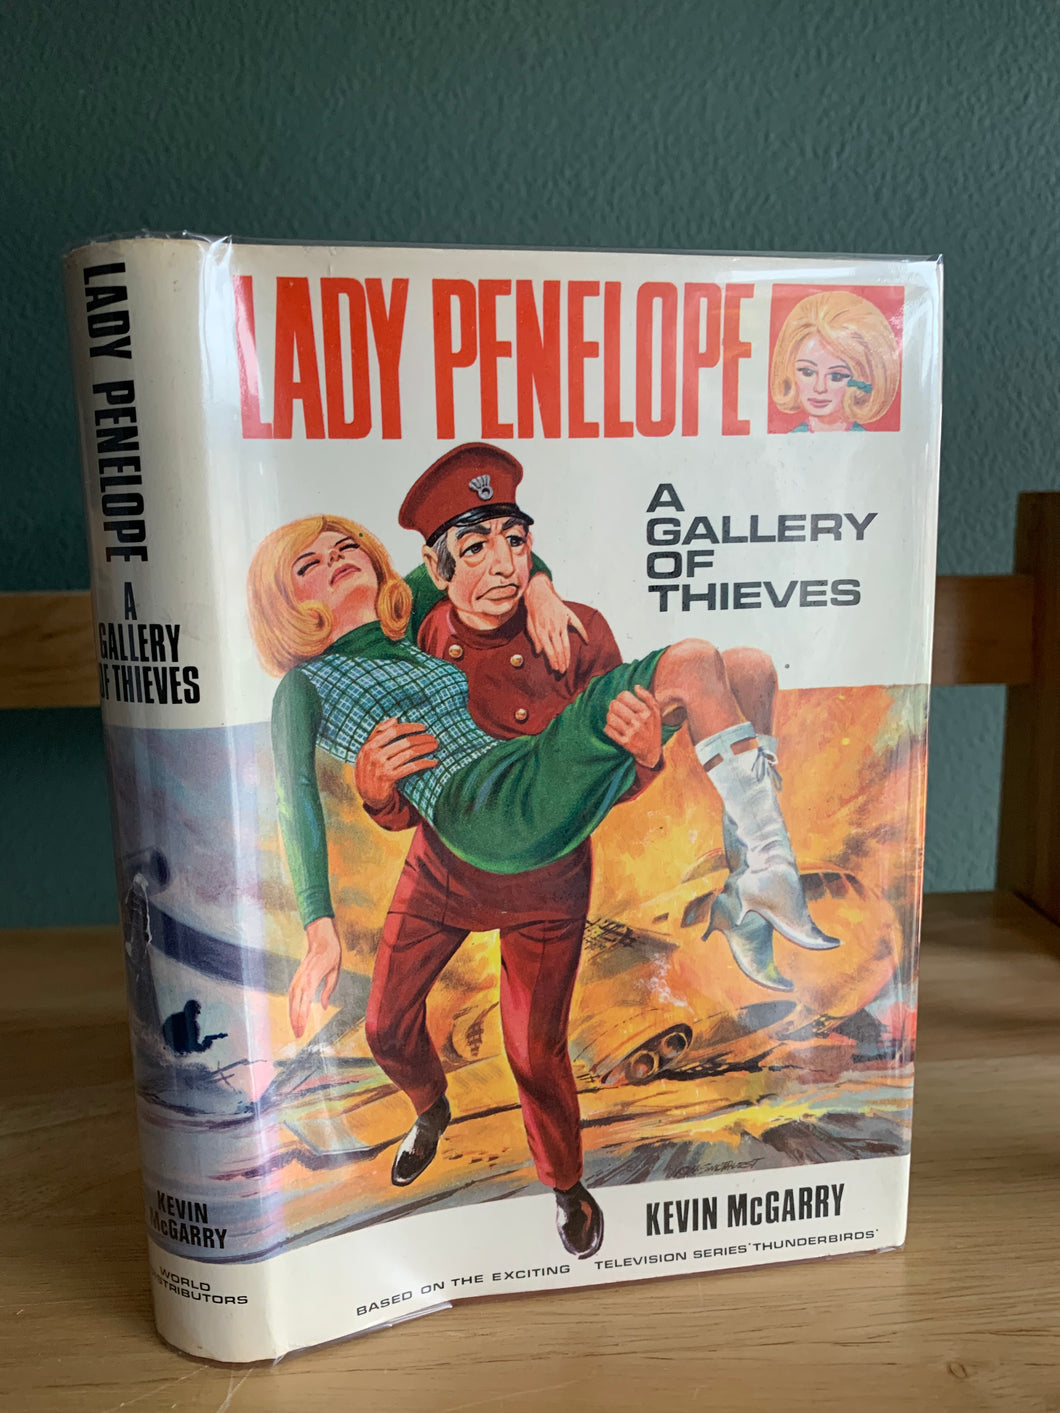 Lady Penelope - A Gallery of Thieves